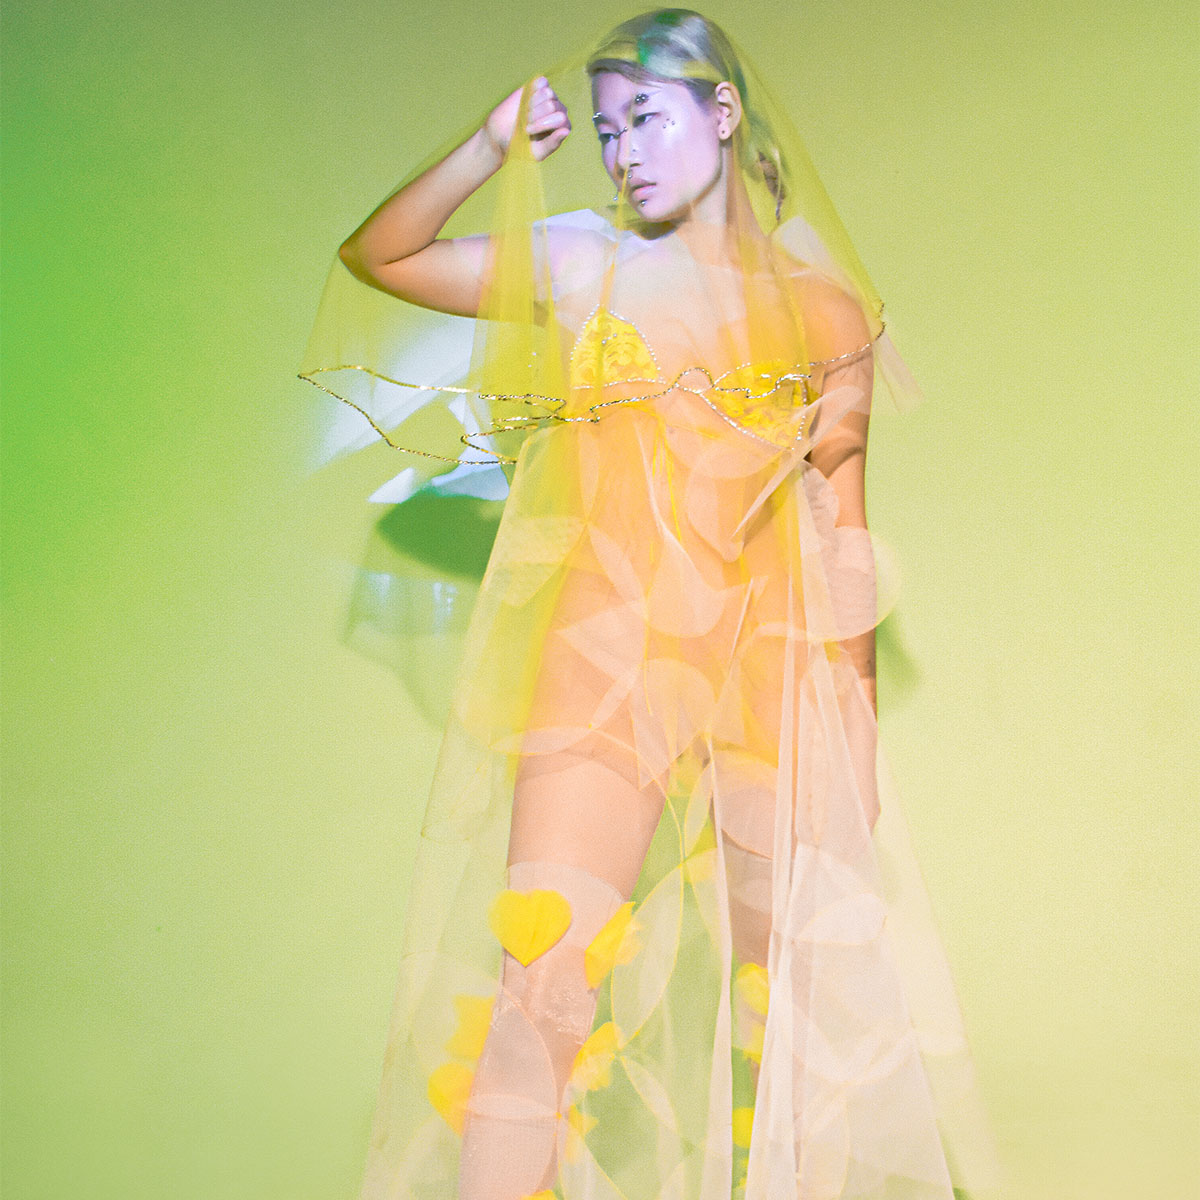 A model is wearing a see-through yellow garment made of krinolin or organza. The model is standing with their hand raised to their face, in front of a bright green photo backdrop.